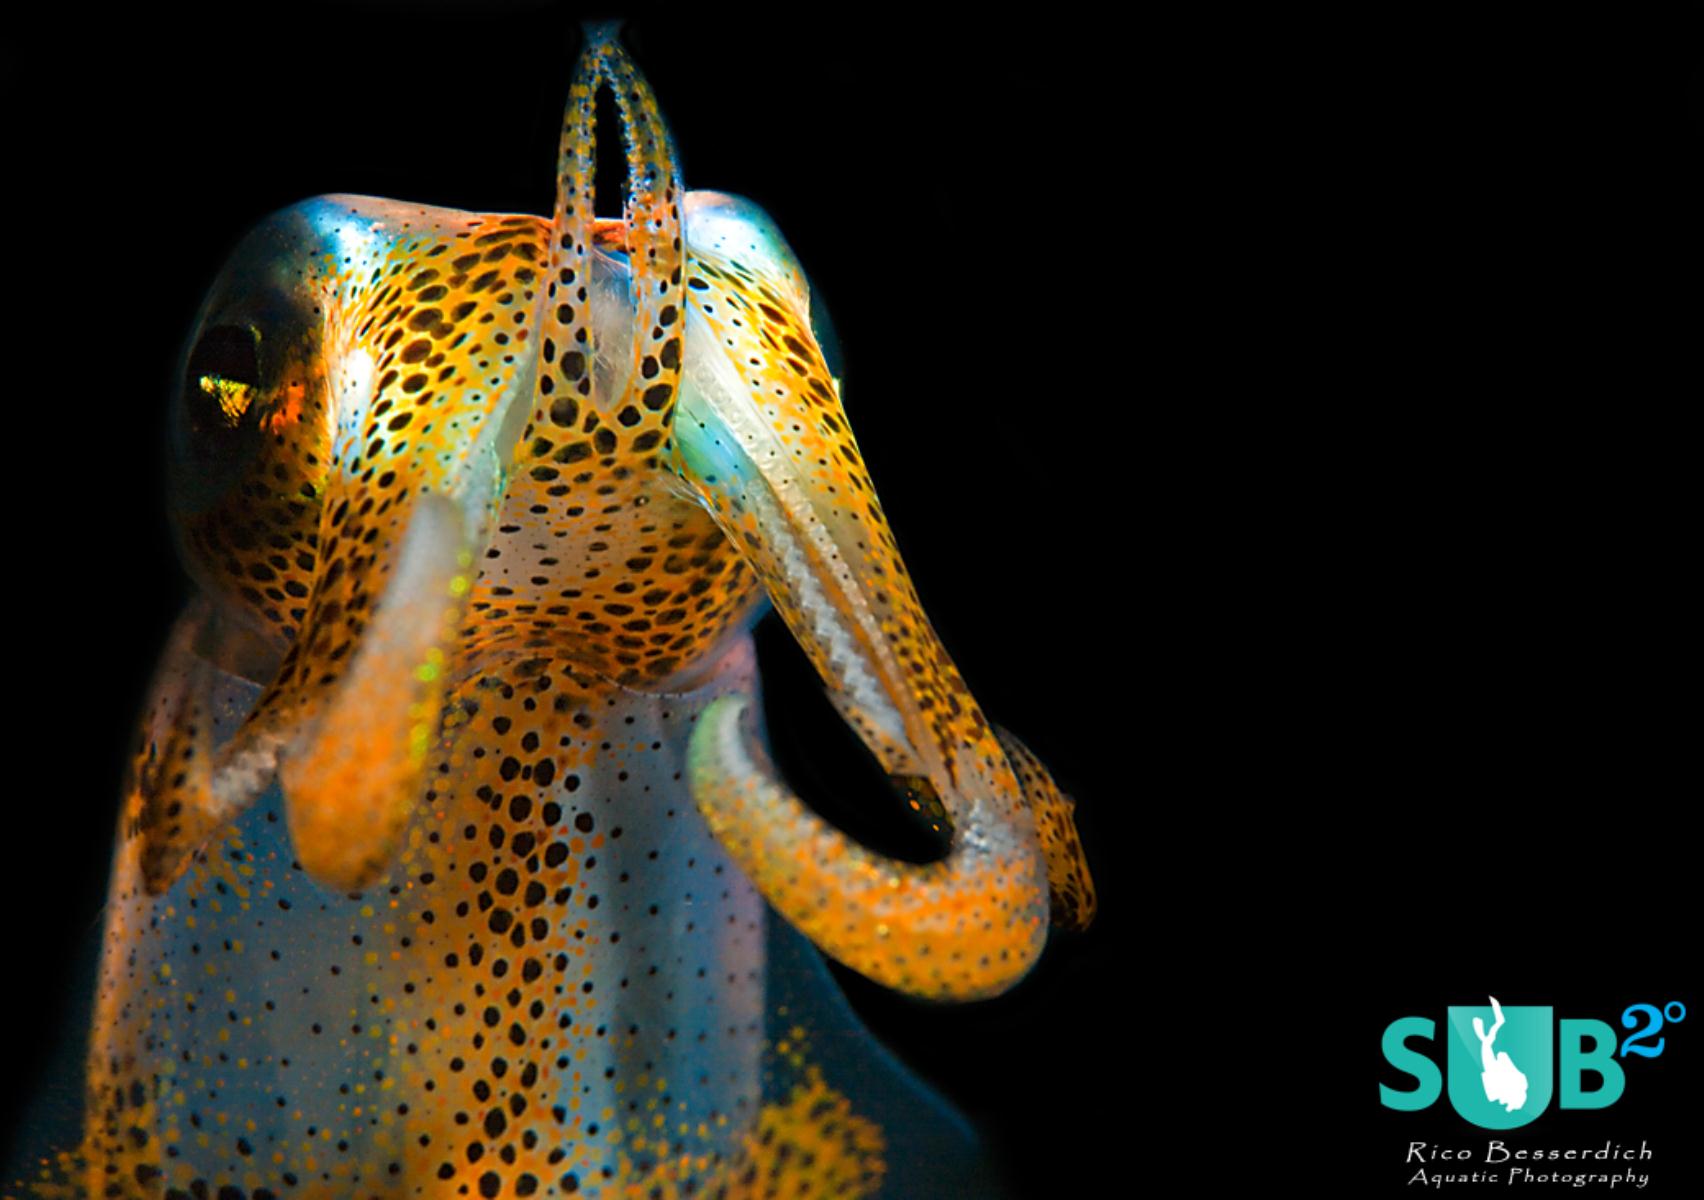 Squid. Placing the subject along the left vertical line of the rule of thirds grid adds tension to the image. 